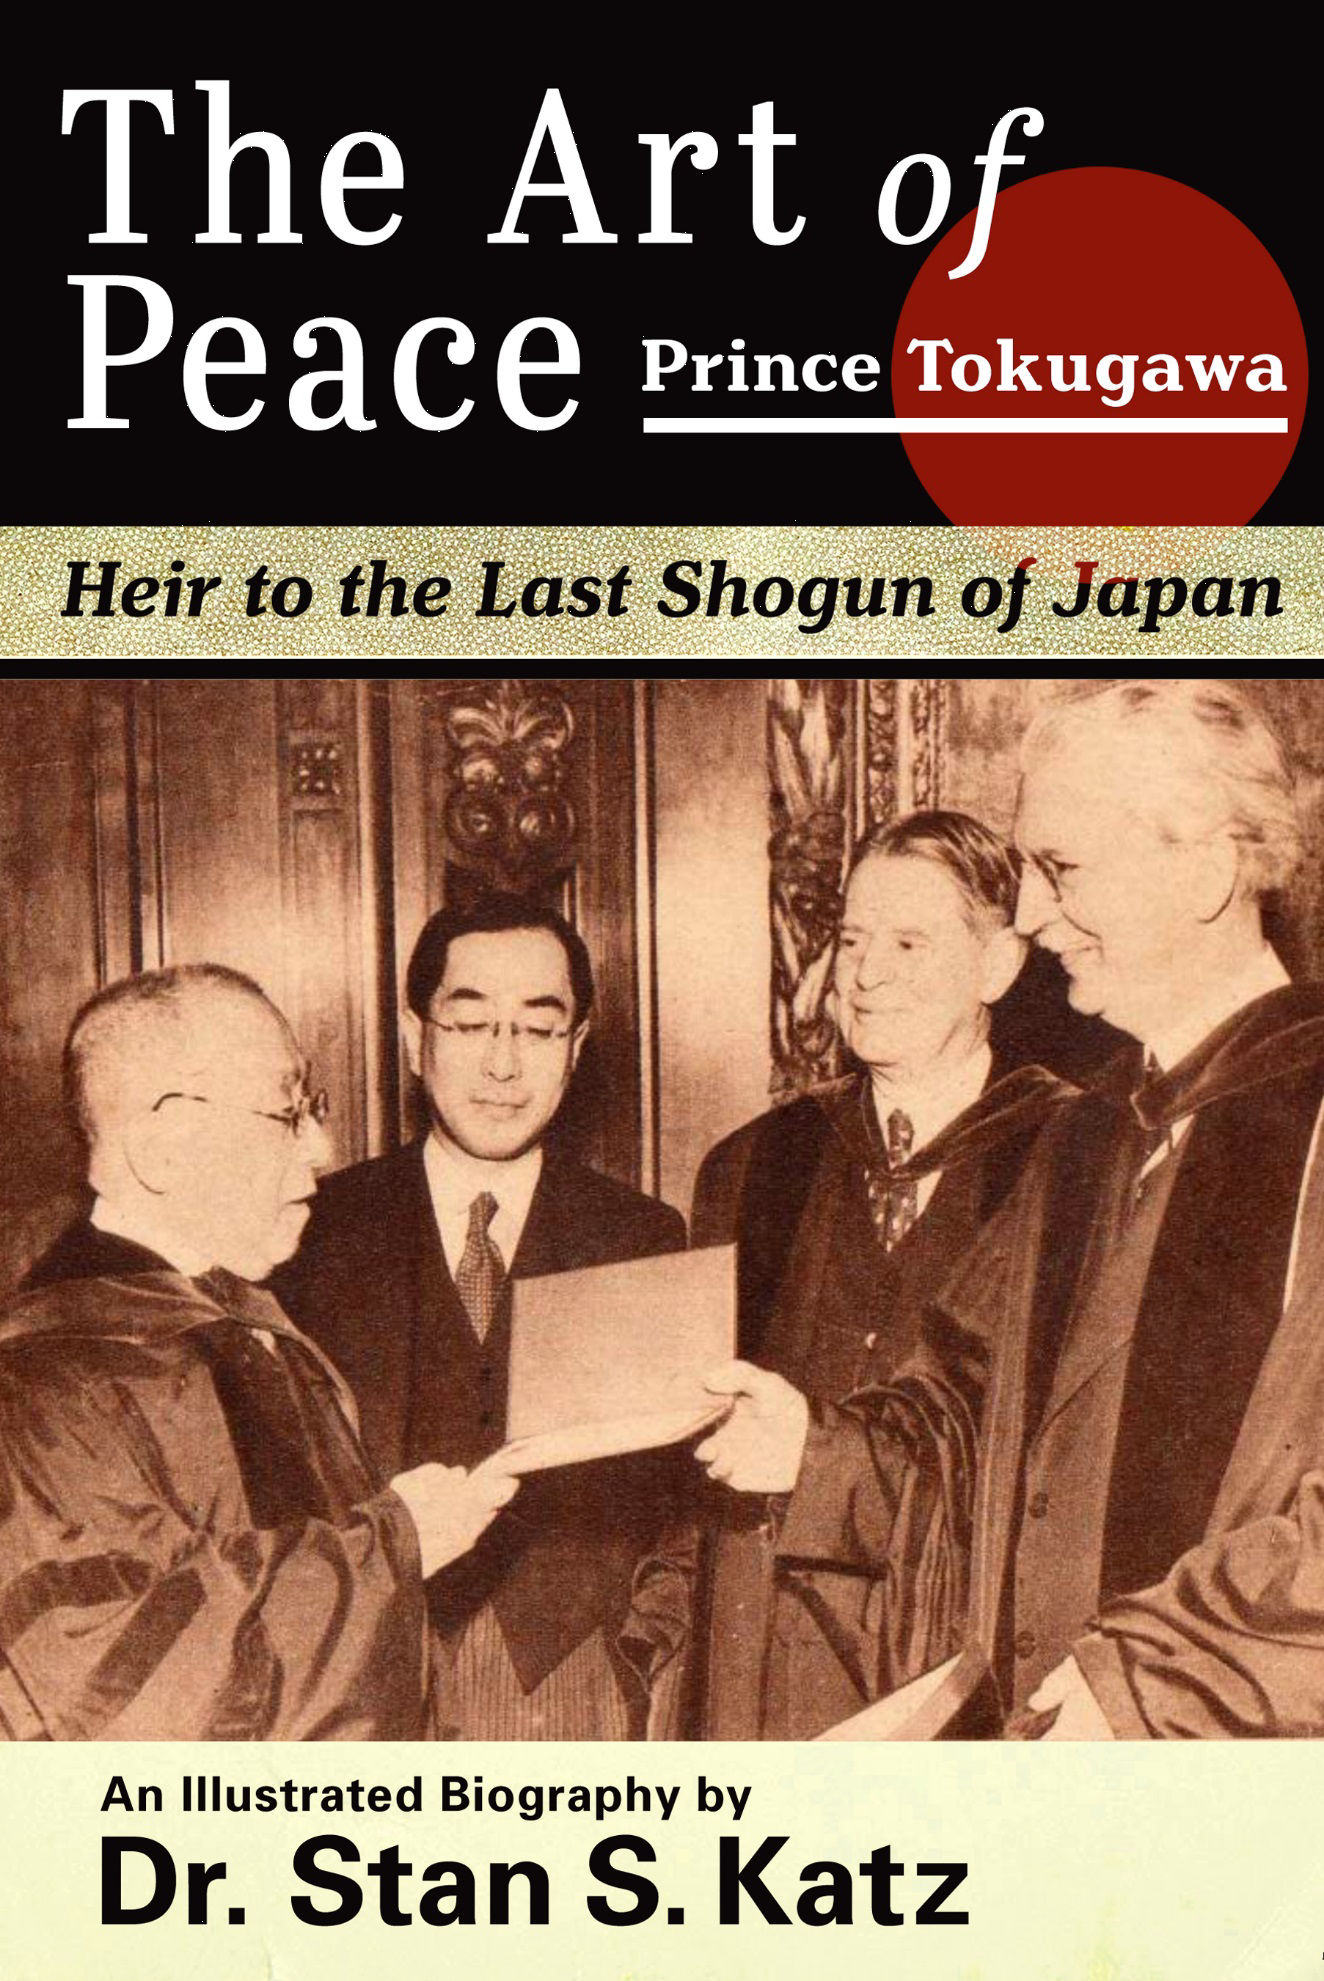 Prince Tokugawa's illustrated biography comes in two